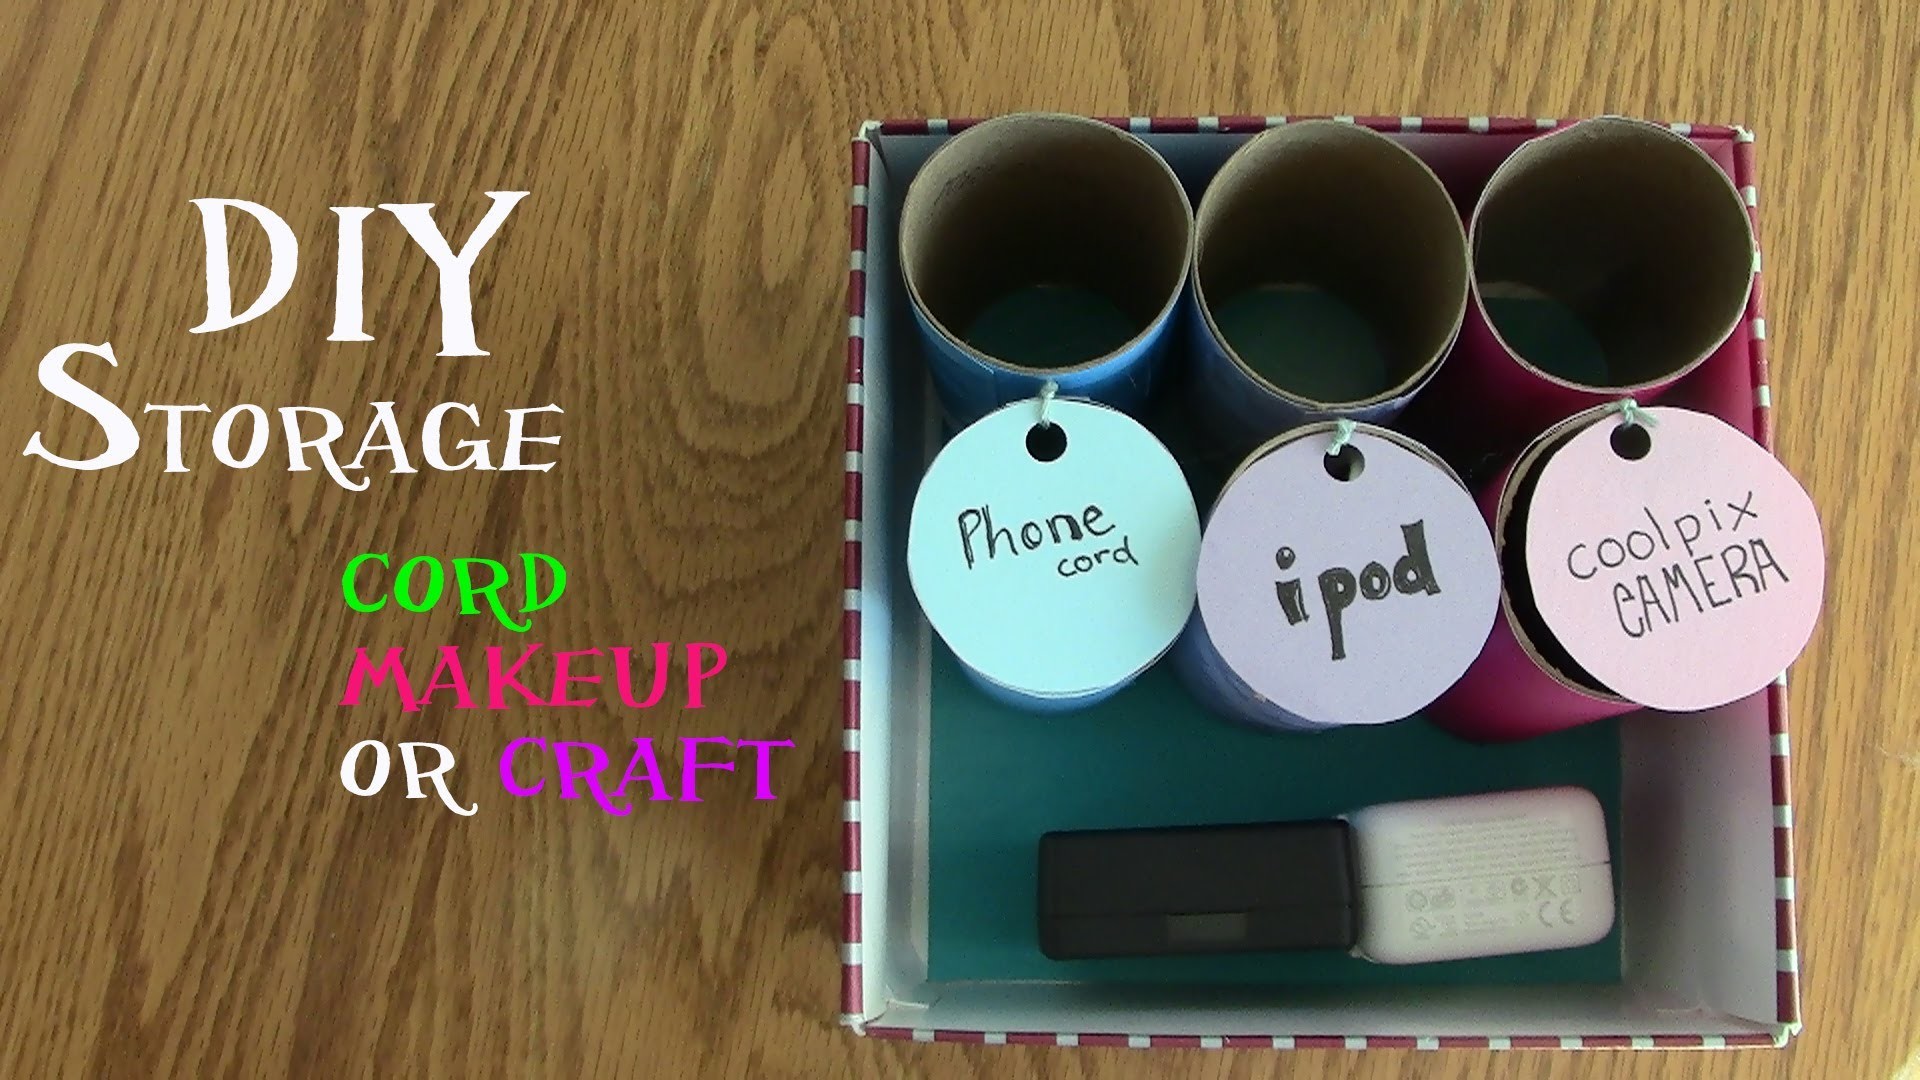 DIY: How to make your own Cord, Makeup, or Craft Storage